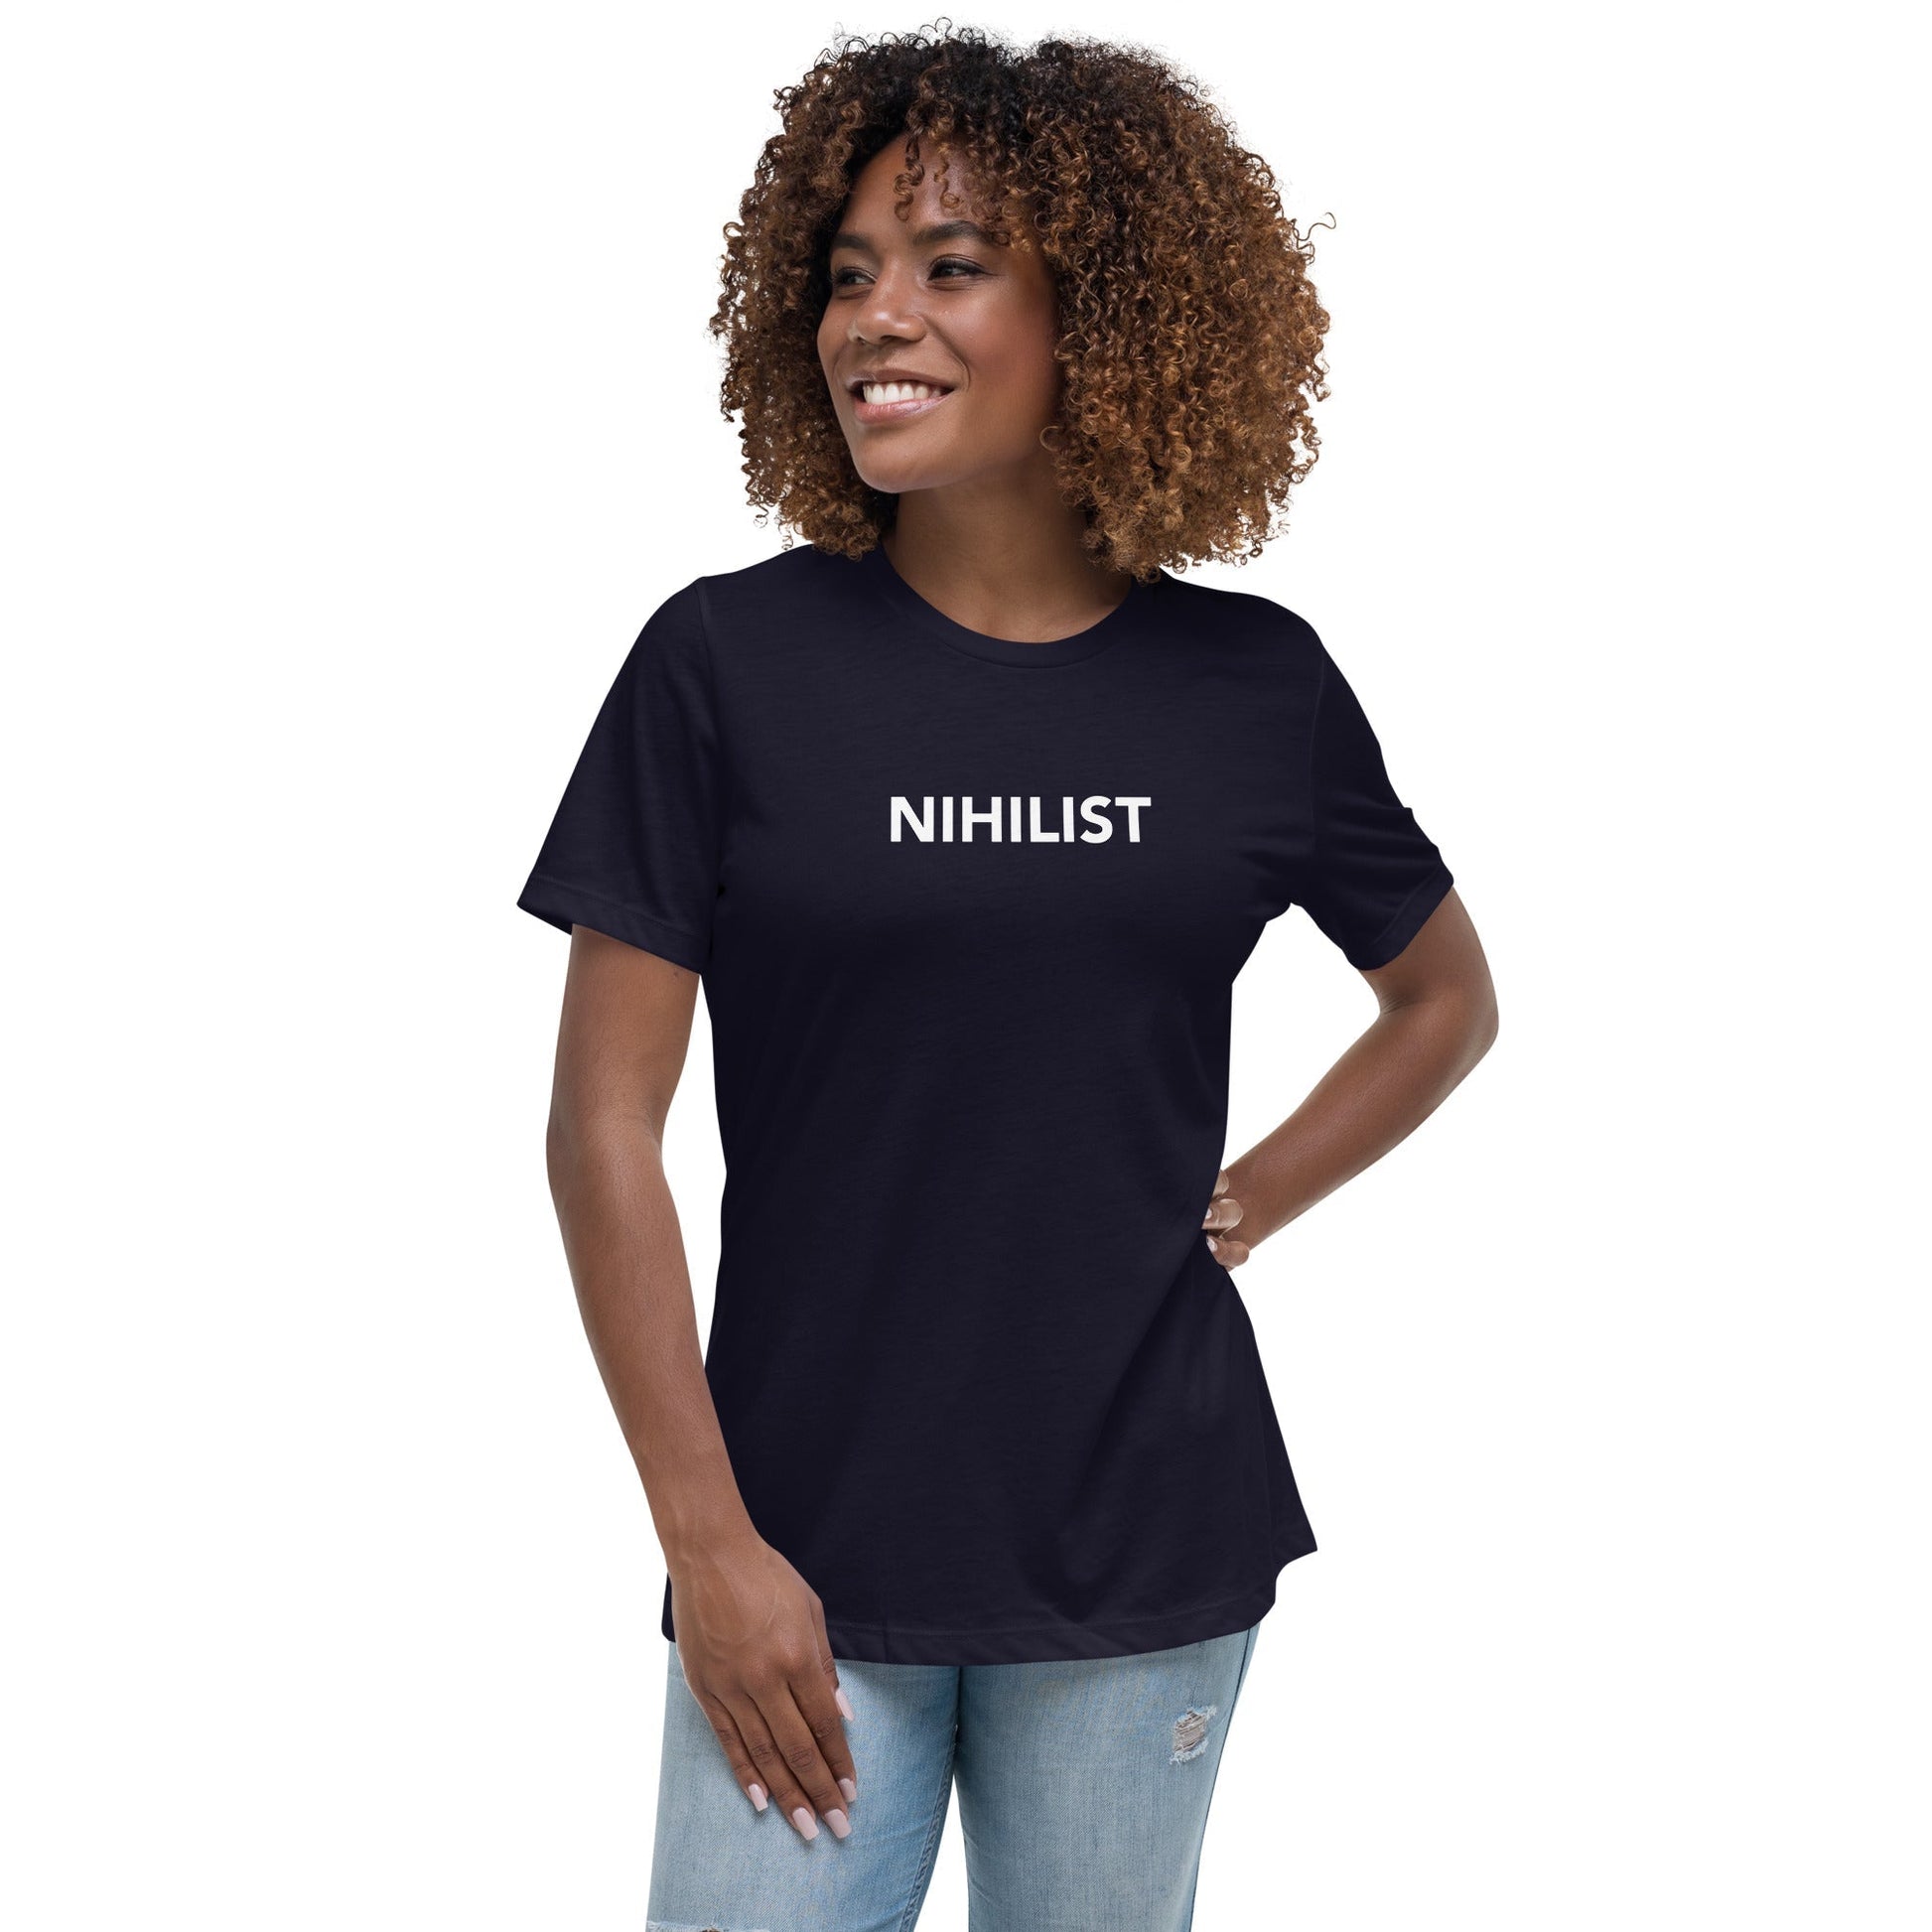 Schools of thought - Nihilist - Women's T-Shirt